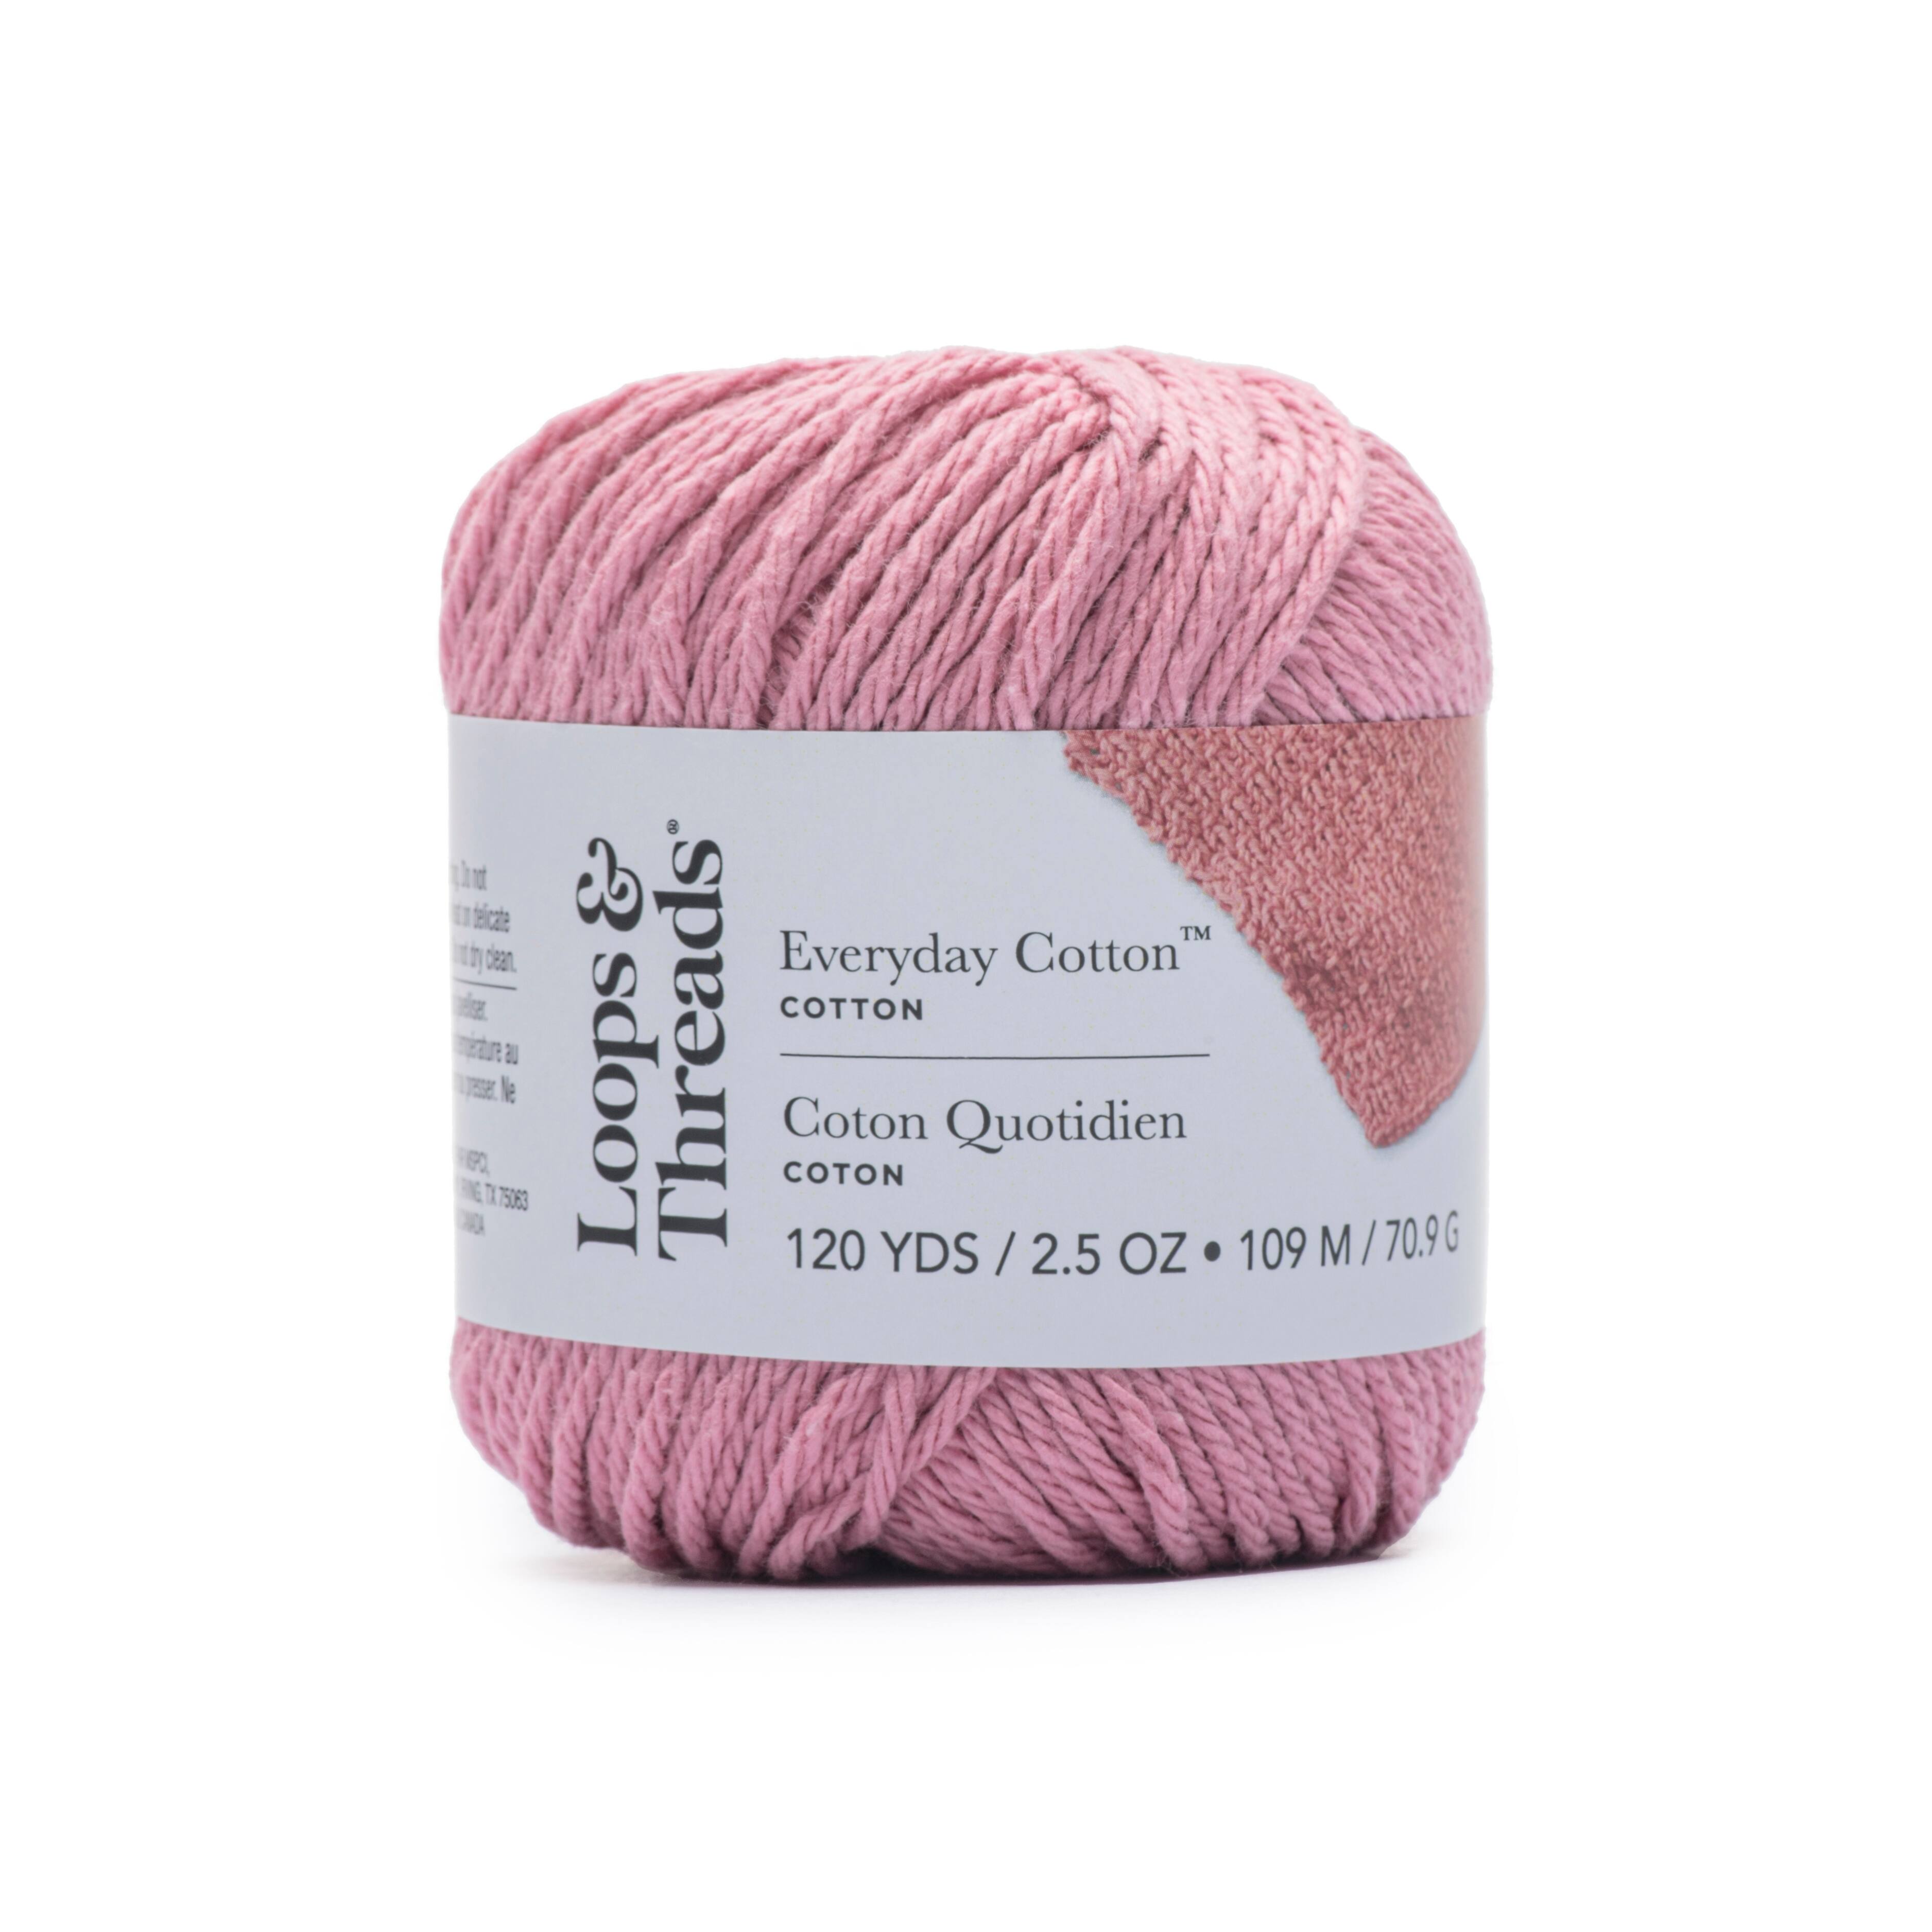 Store Brand Yarn Review: Michaels Edition! 